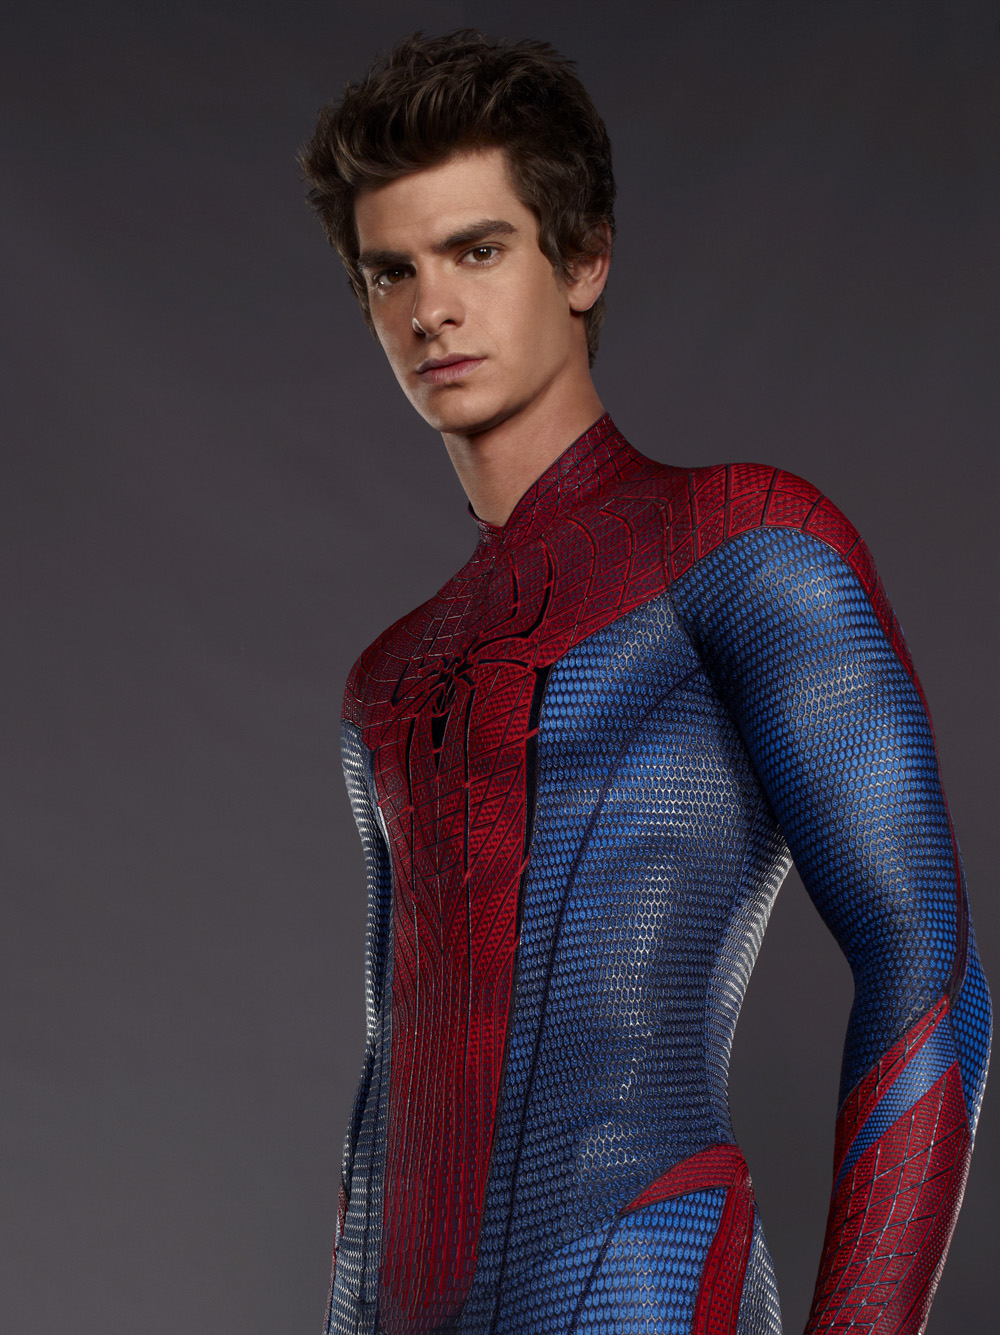 Movie Buff's Reviews: ANDREW GARFIELD AMAZES IN THE NEW “SPIDER-MAN”